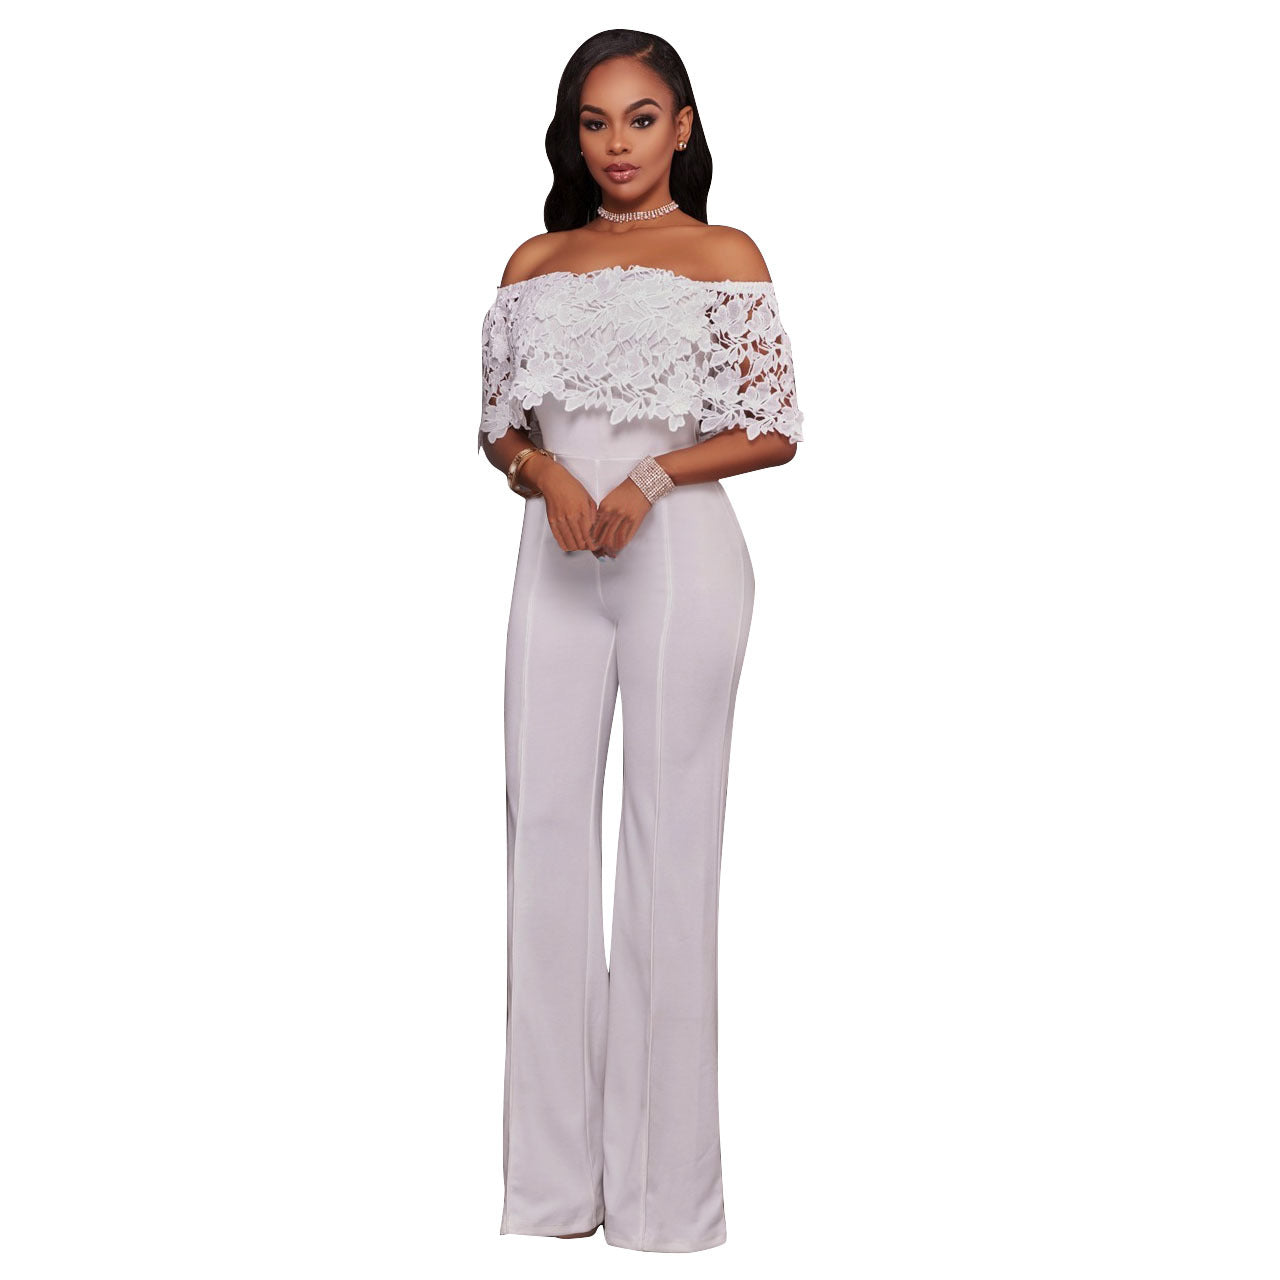 Tight One-neck Water-soluble Embroidered Jumpsuit